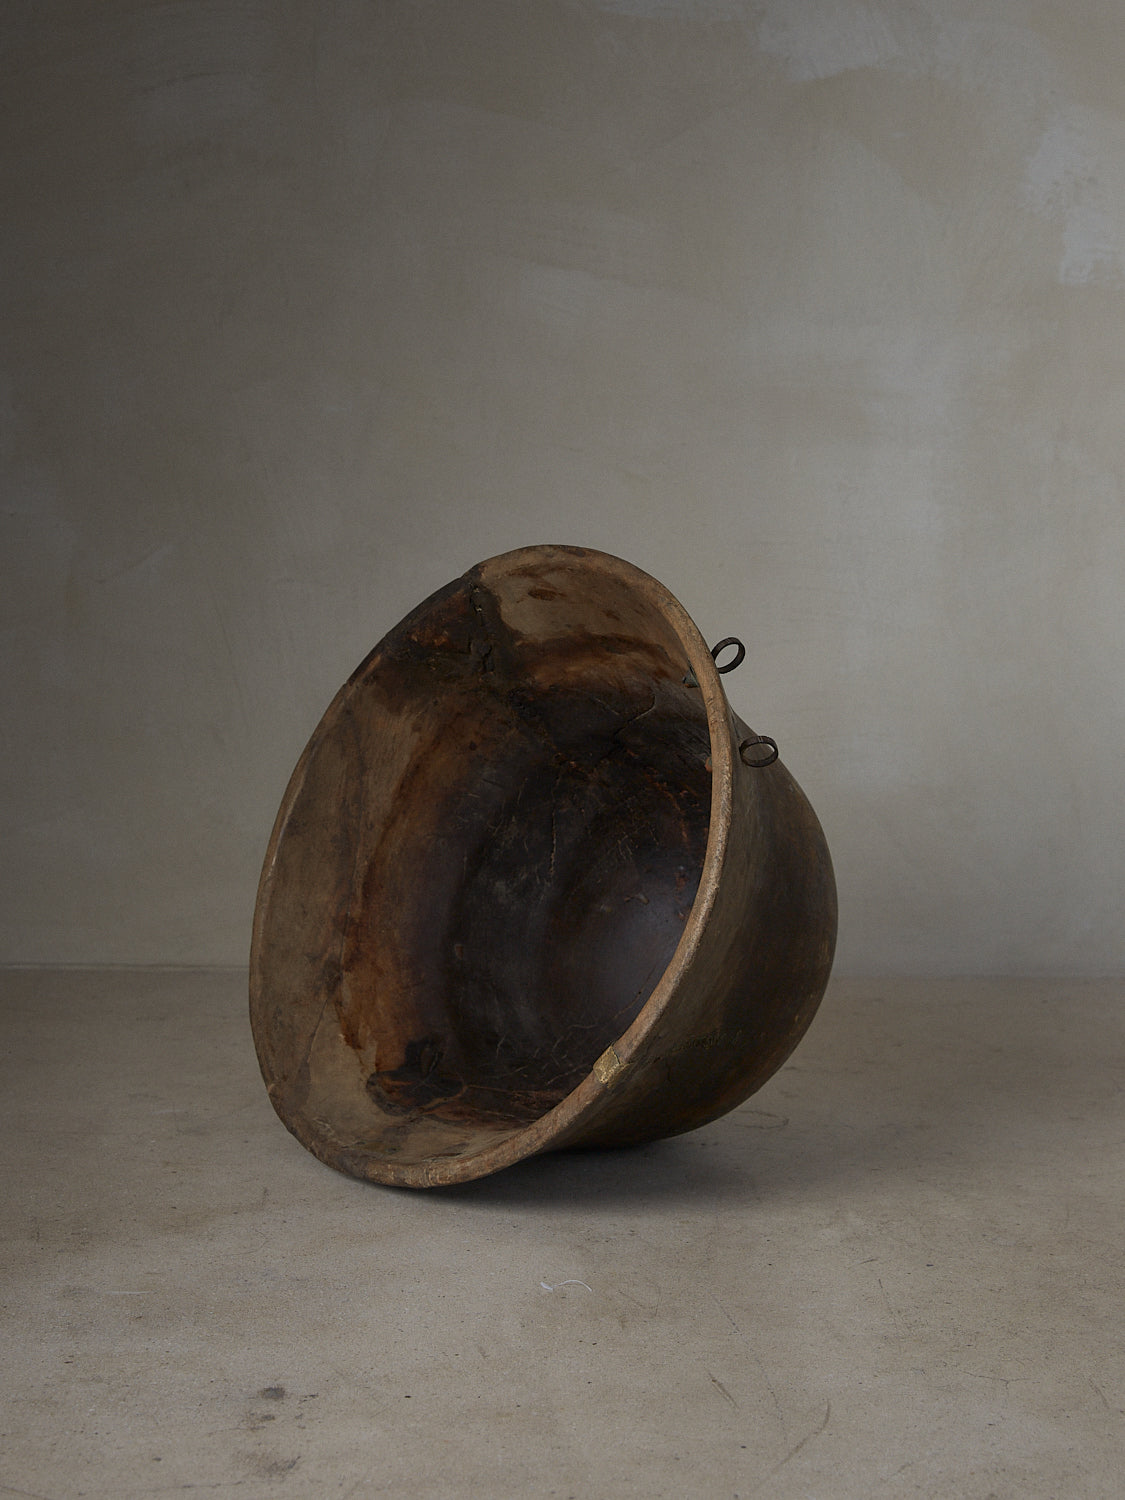 Bowl Tuareg. Rare vintage find. Authentic, oversized wood bowl from the Tuareg peoples in West Africa featuring a wide, open rim and original hardware repair details.